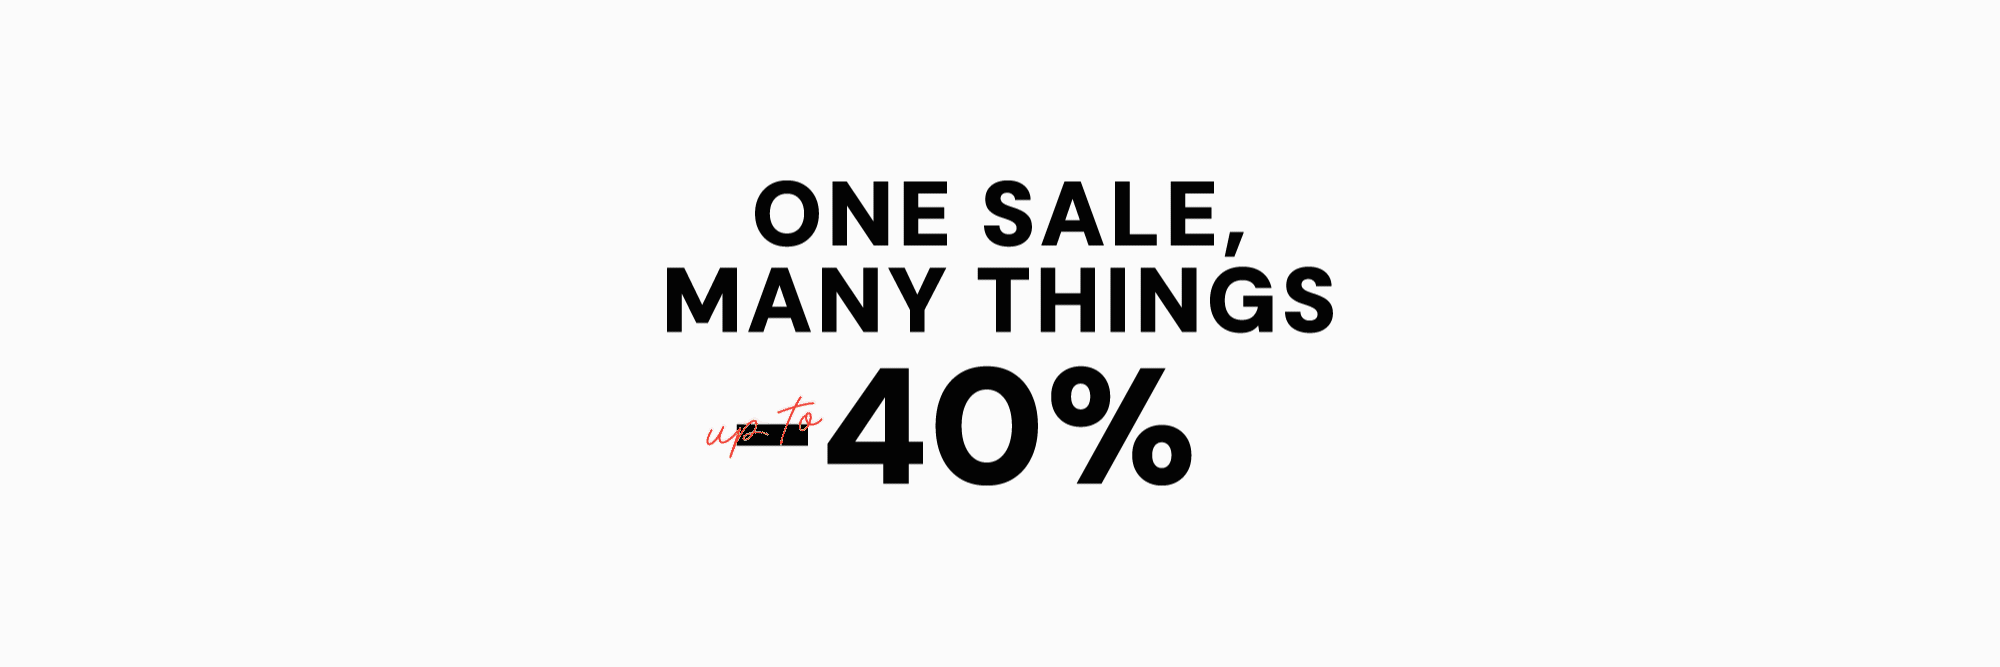 One Sale Many Things